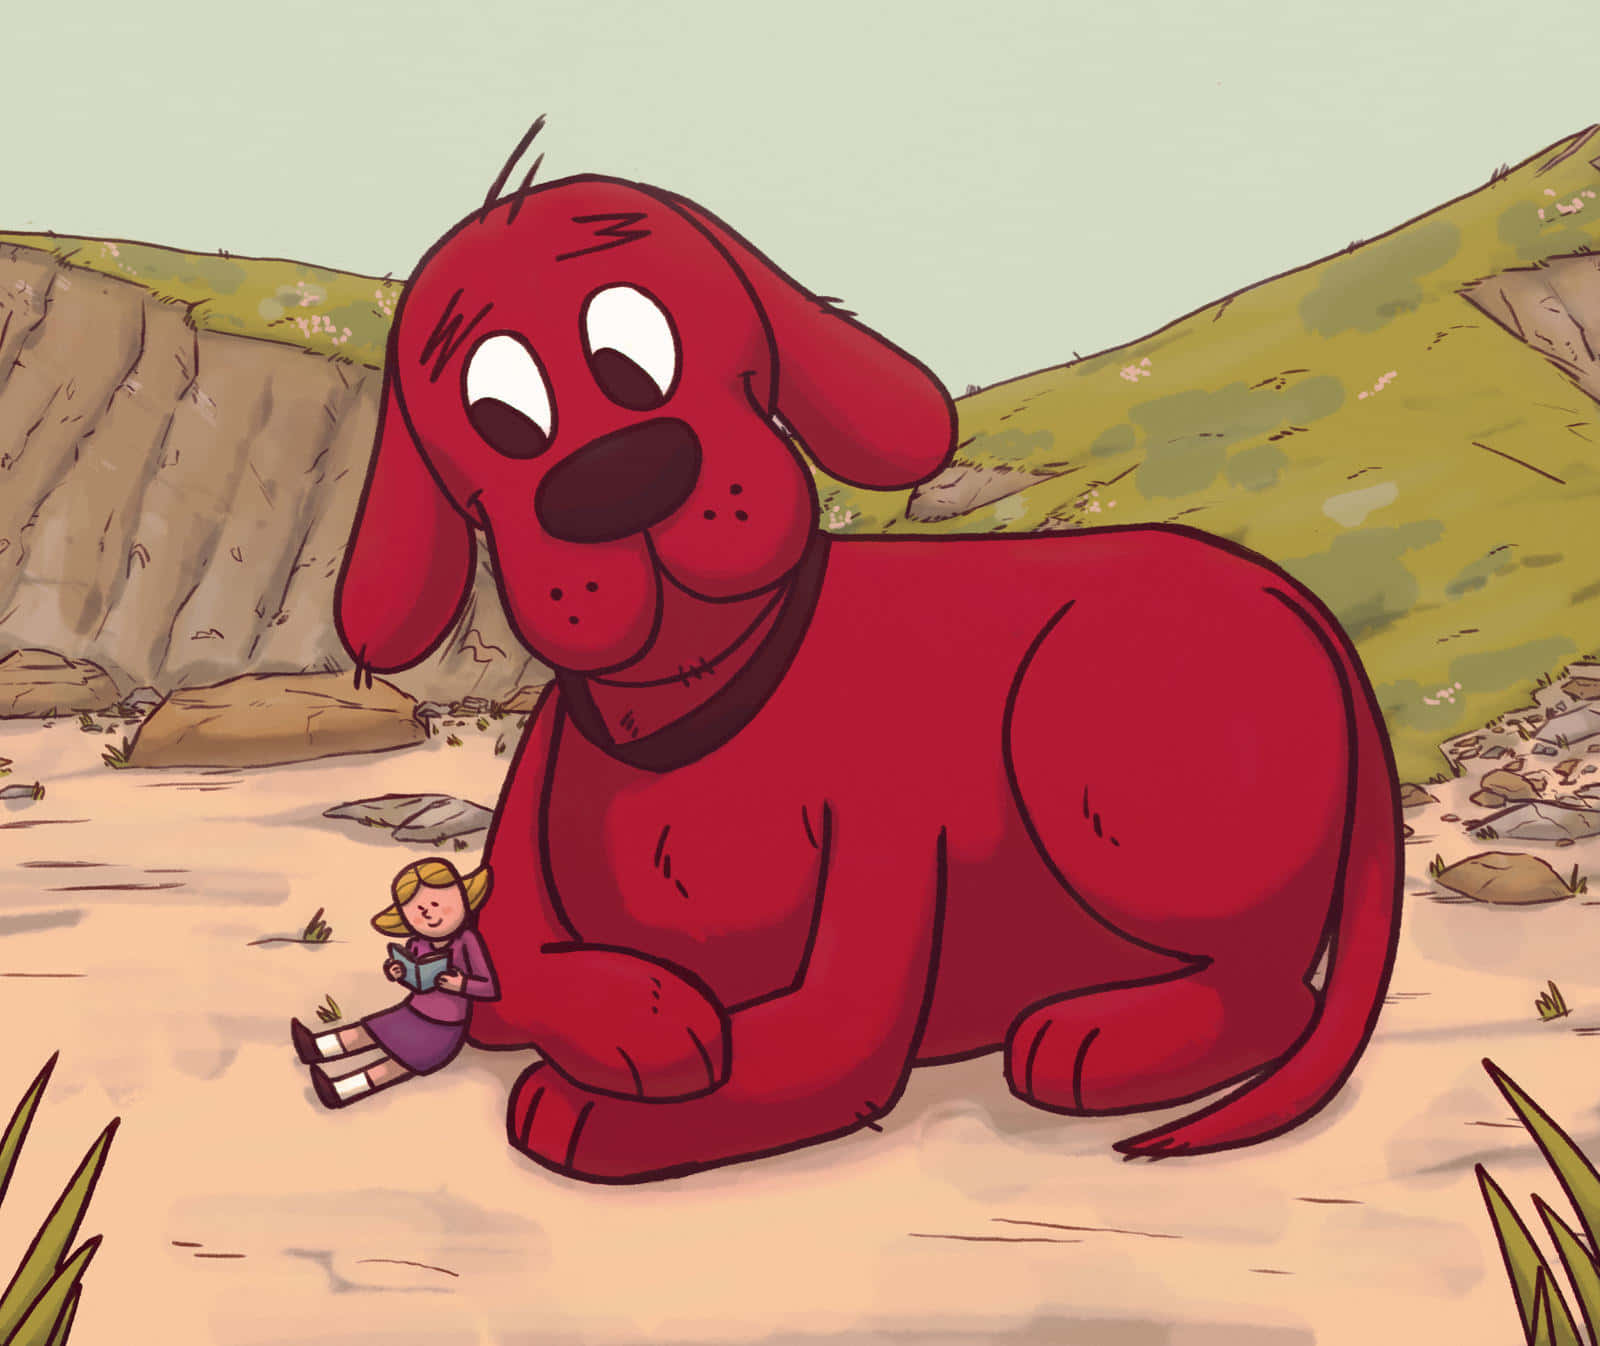 The beloved red dog, Clifford, giving a smile